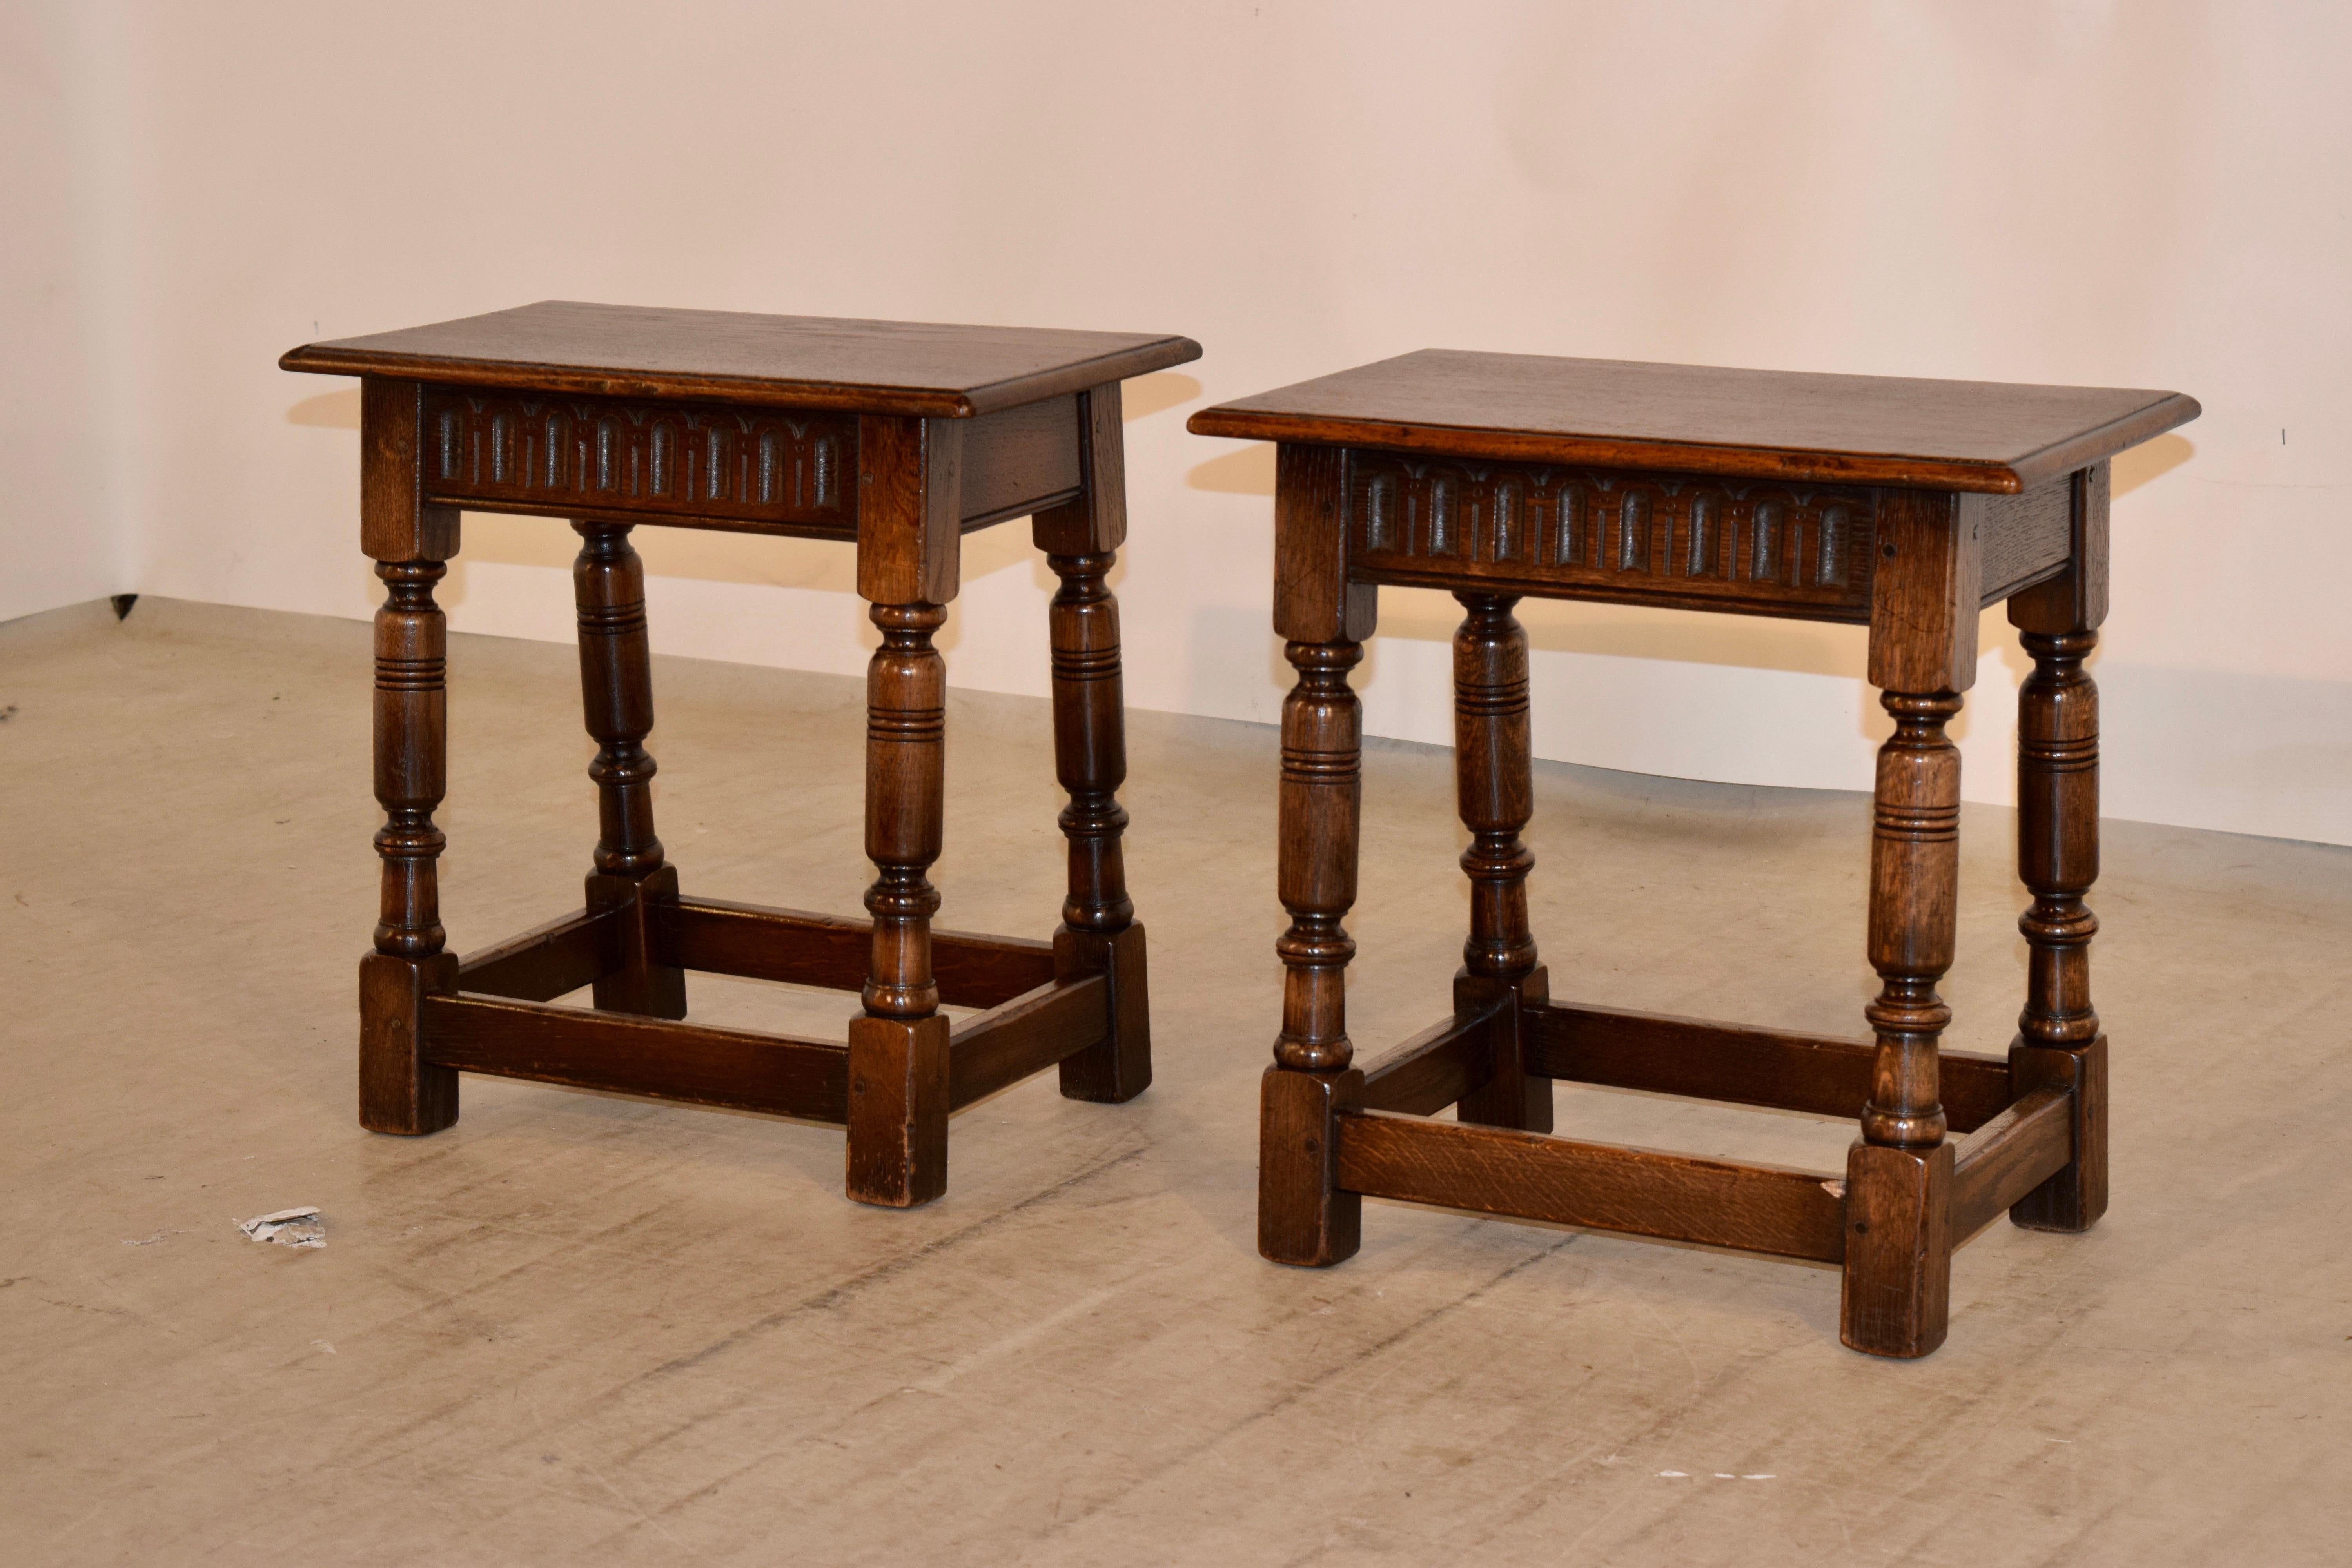 English Pair of 19th Century Joint Stools from England